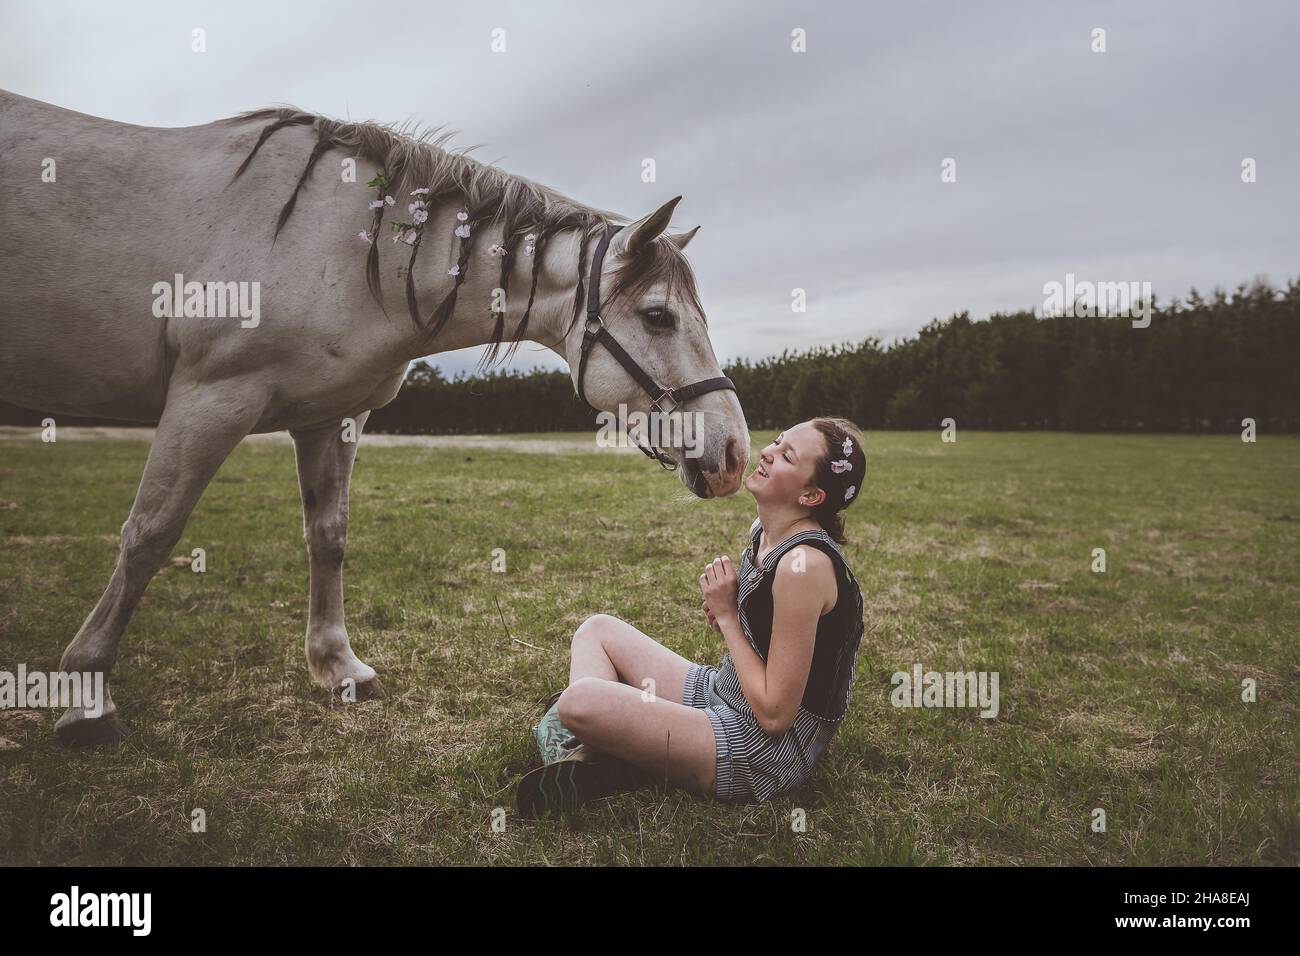 A teen girl sitting with grey horse with braids and flowers Stock Photo